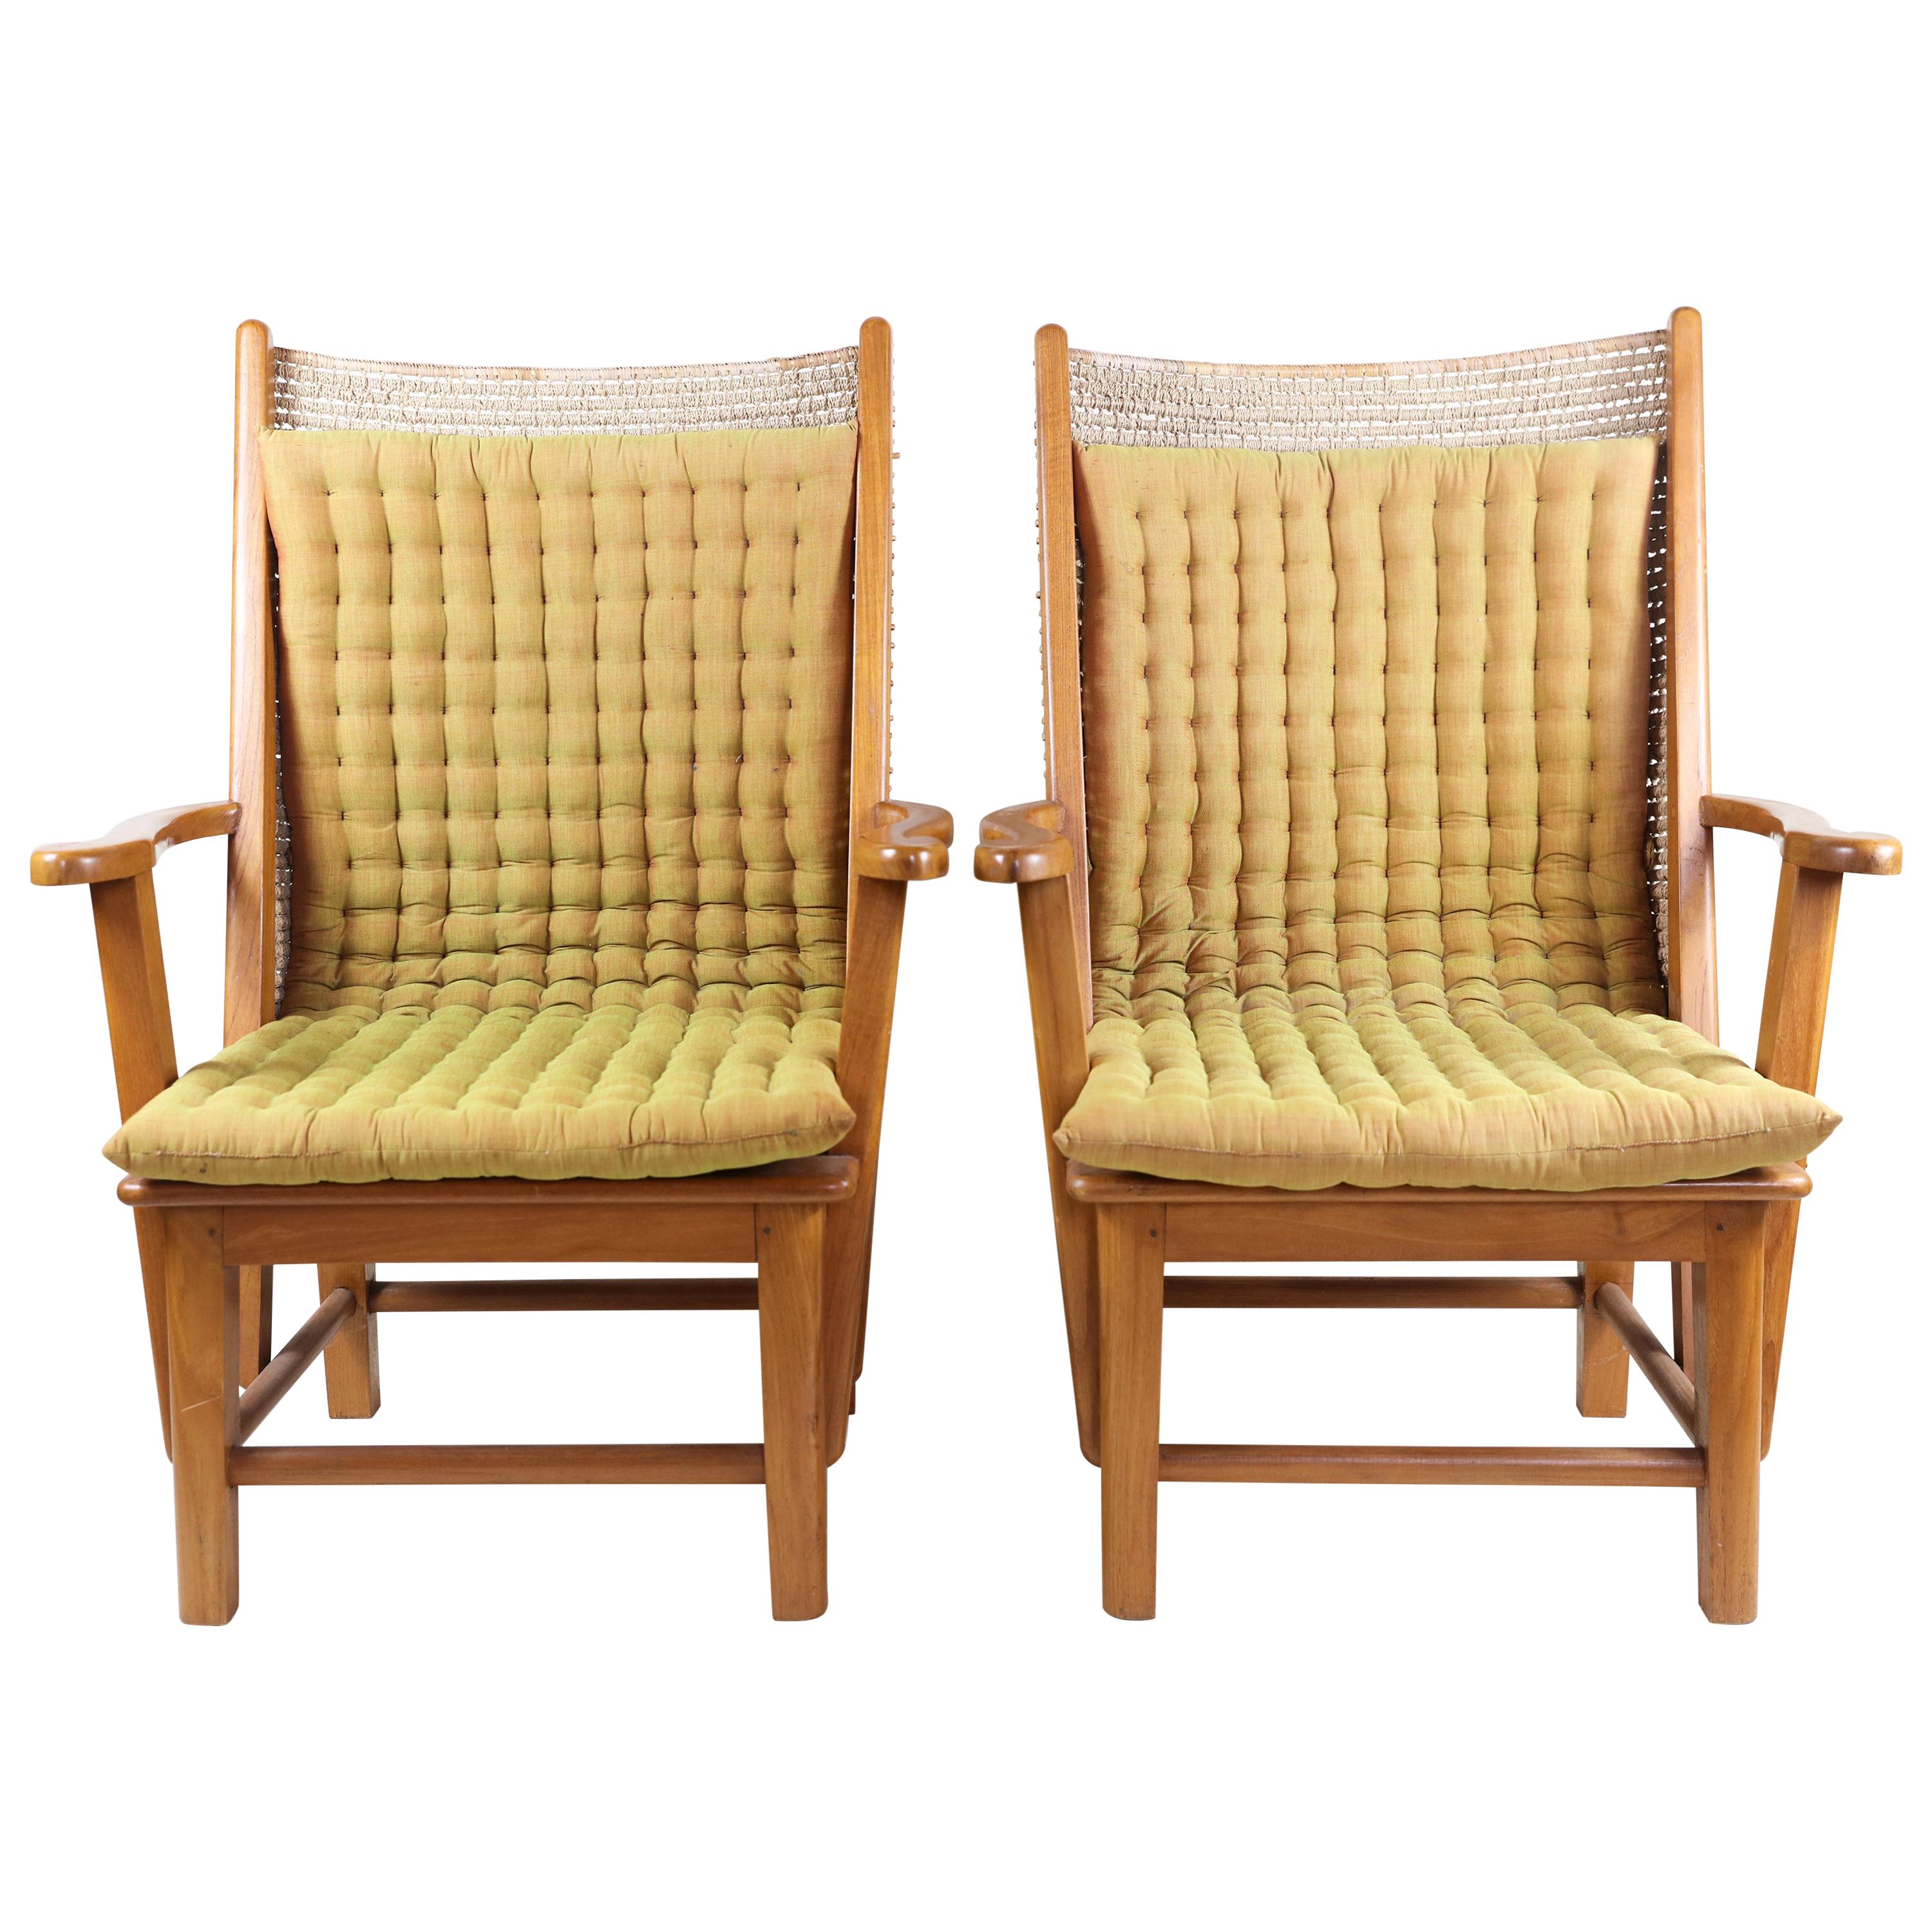 Pair of Woven Jute Chairs